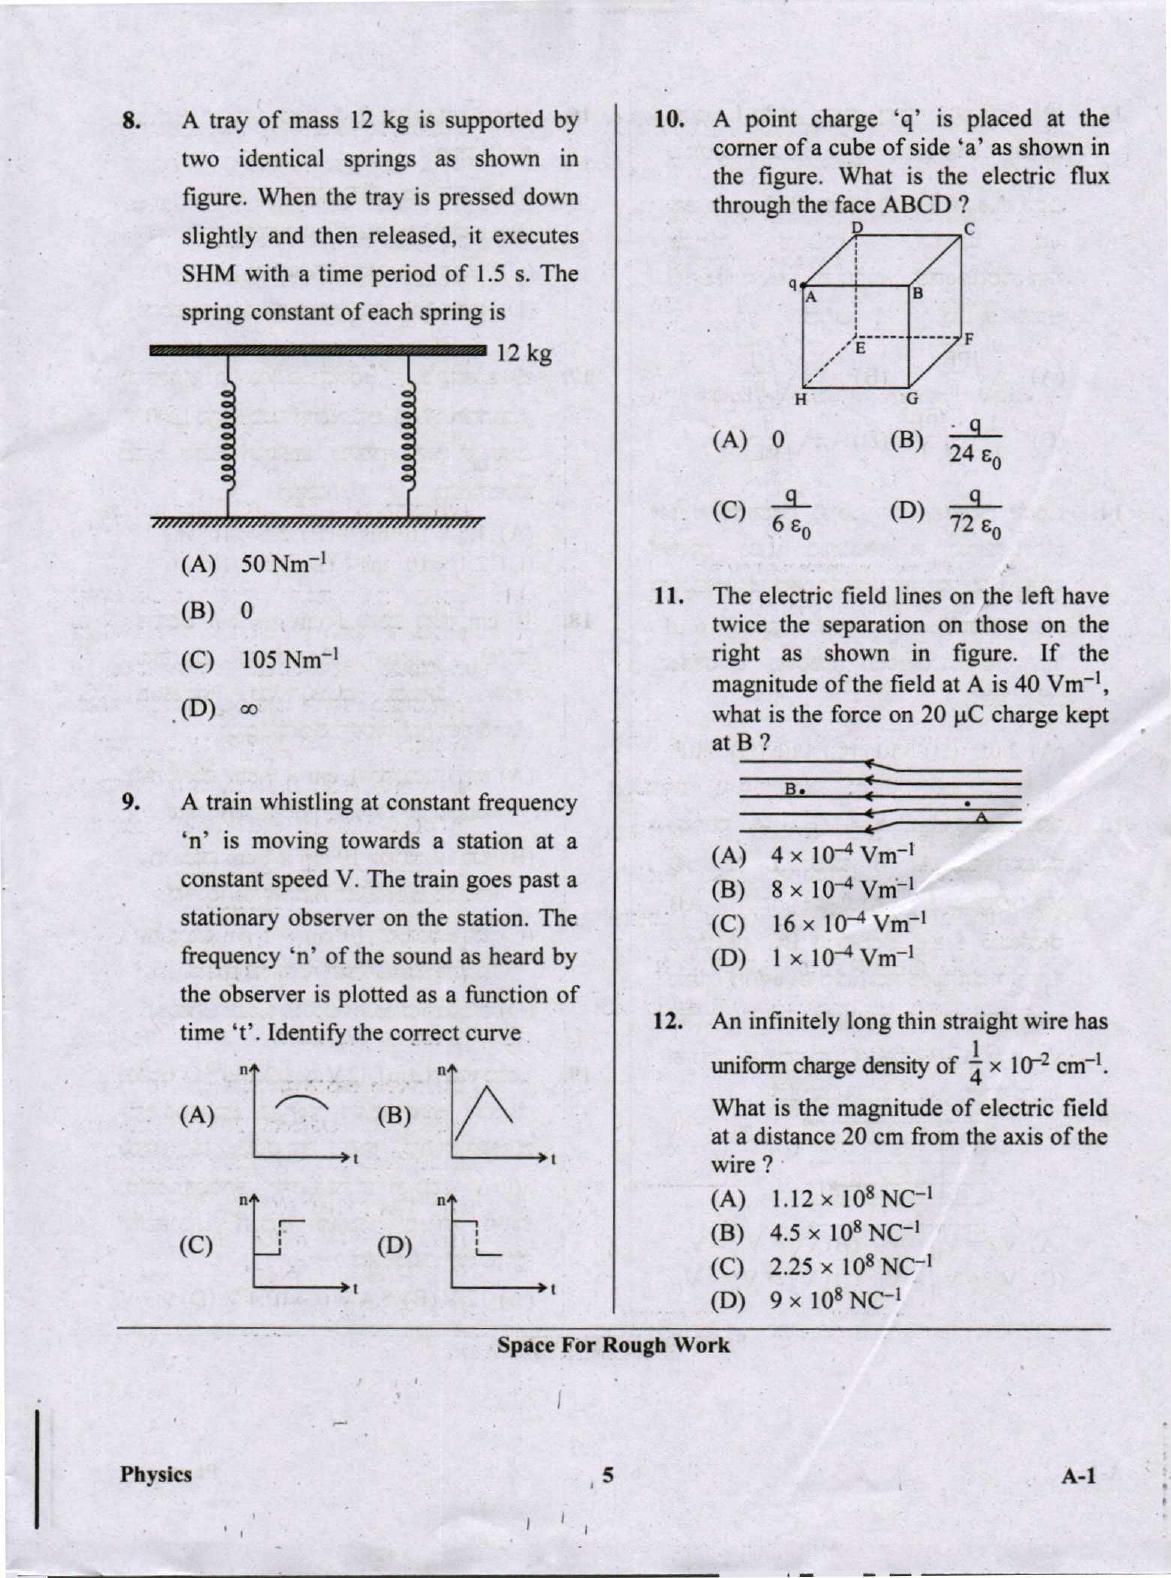 KCET Physics 2020 Question Papers - Page 5